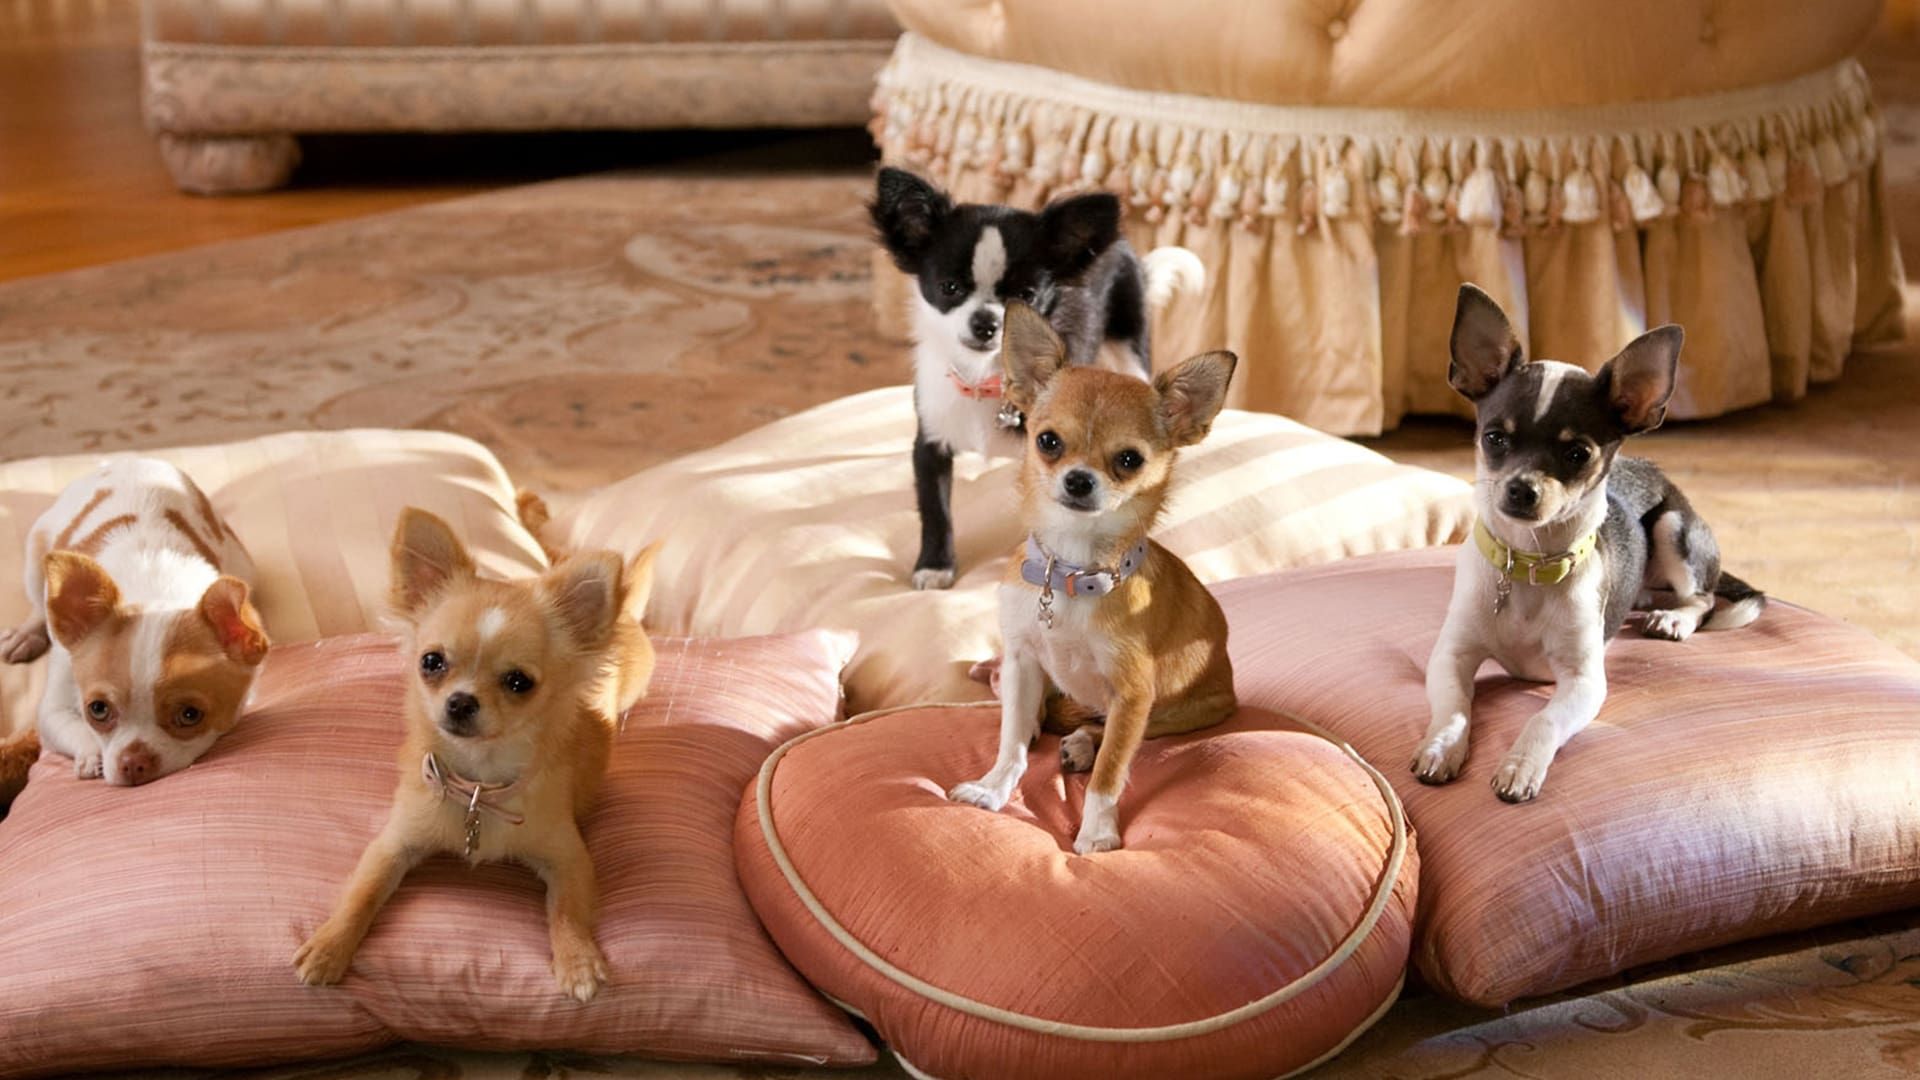 Beverly Hills Chihuahua 2 (2011) on HBO MAX, HBO, and Streaming Online